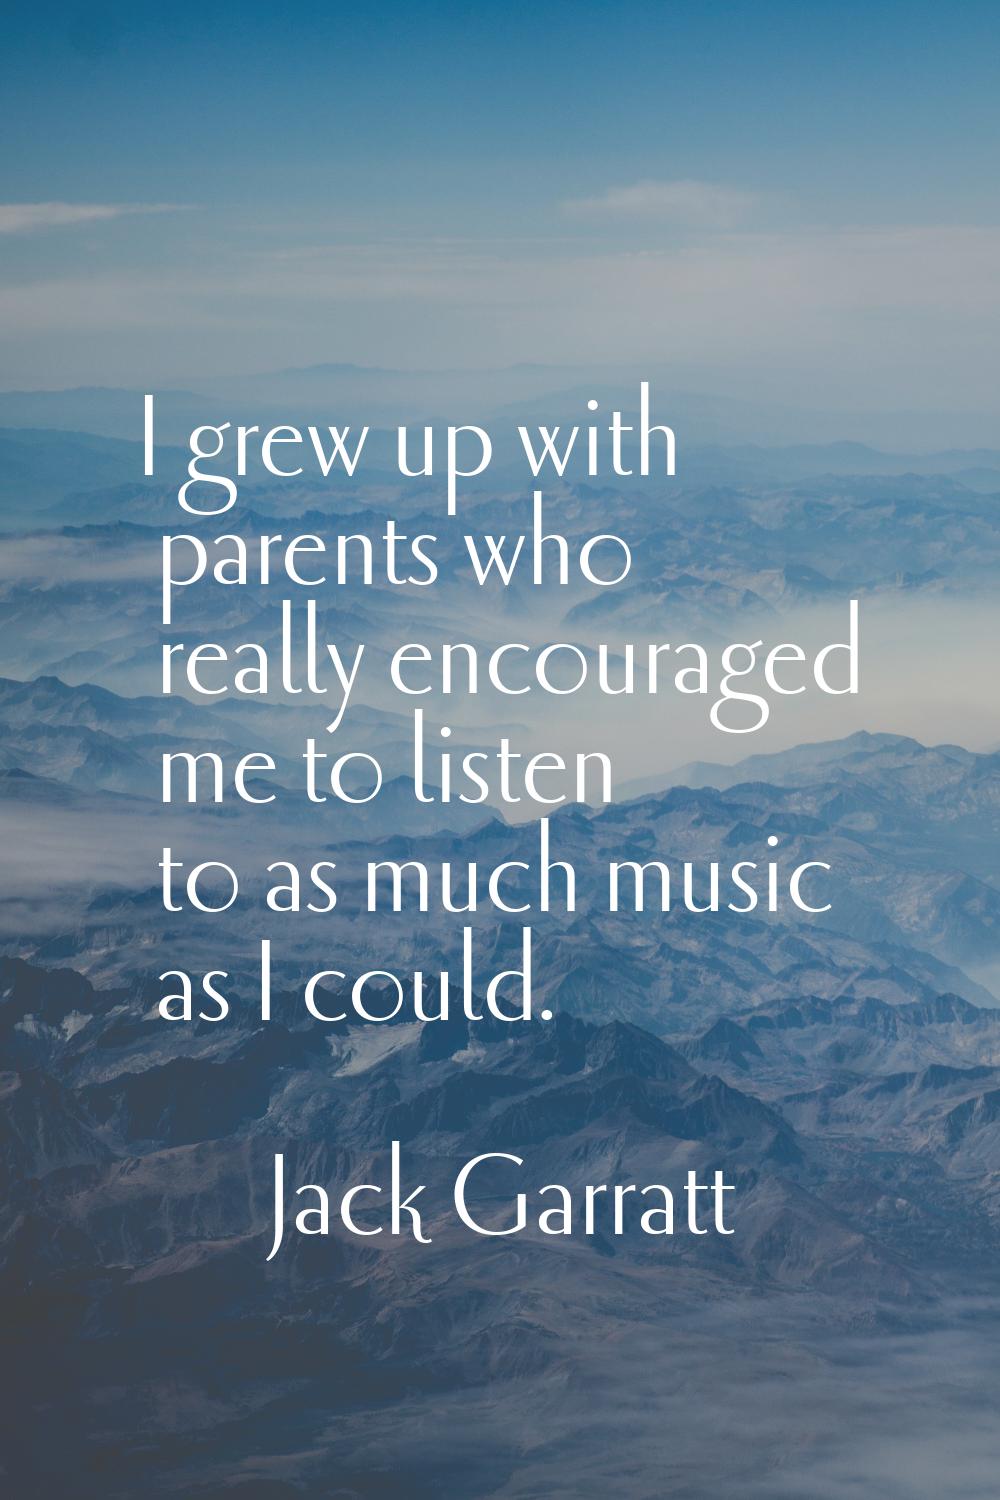 I grew up with parents who really encouraged me to listen to as much music as I could.